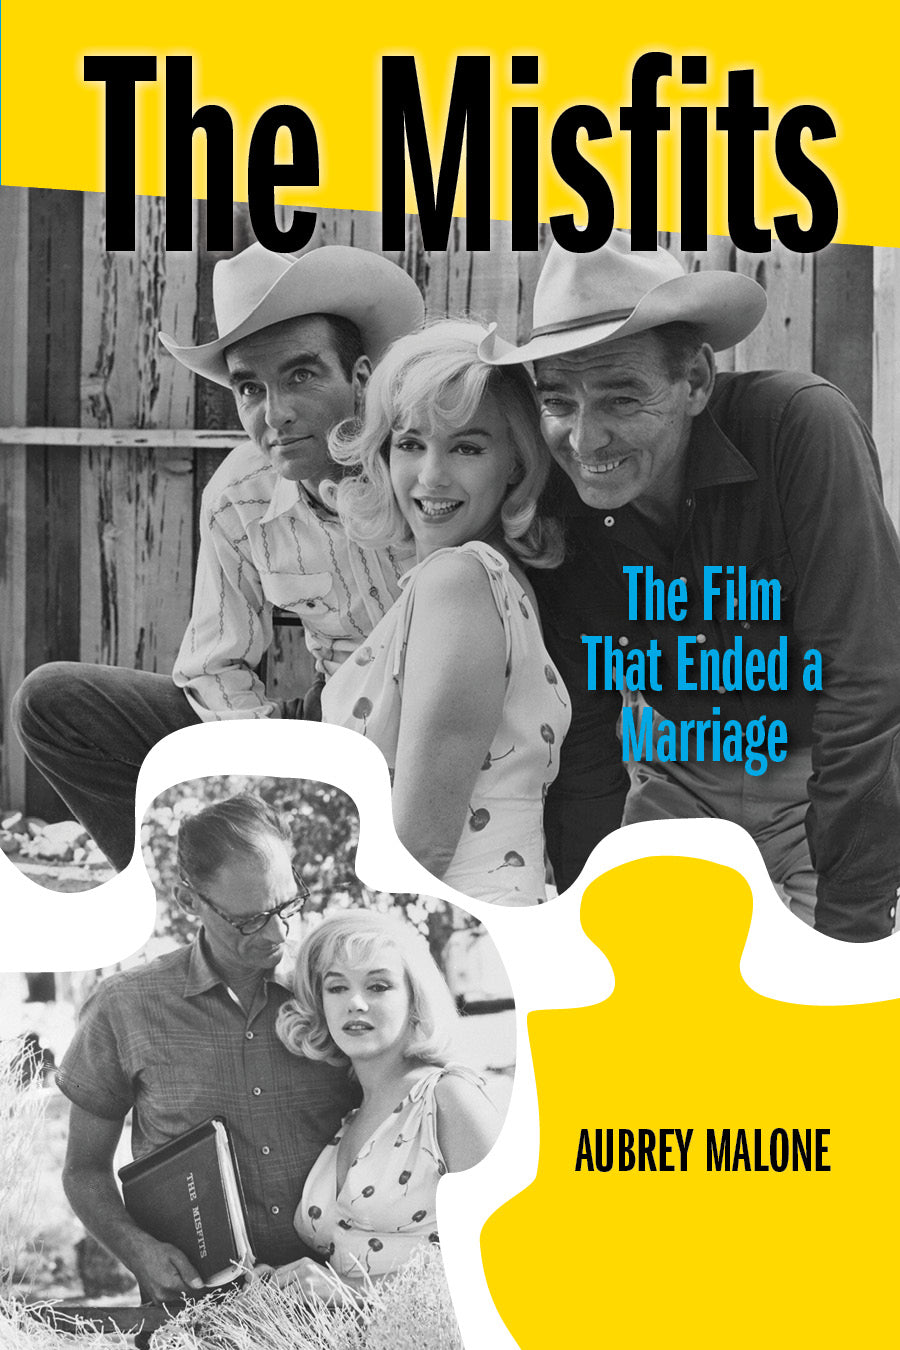 The Misfits: The Film That Ended a Marriage (paperback)